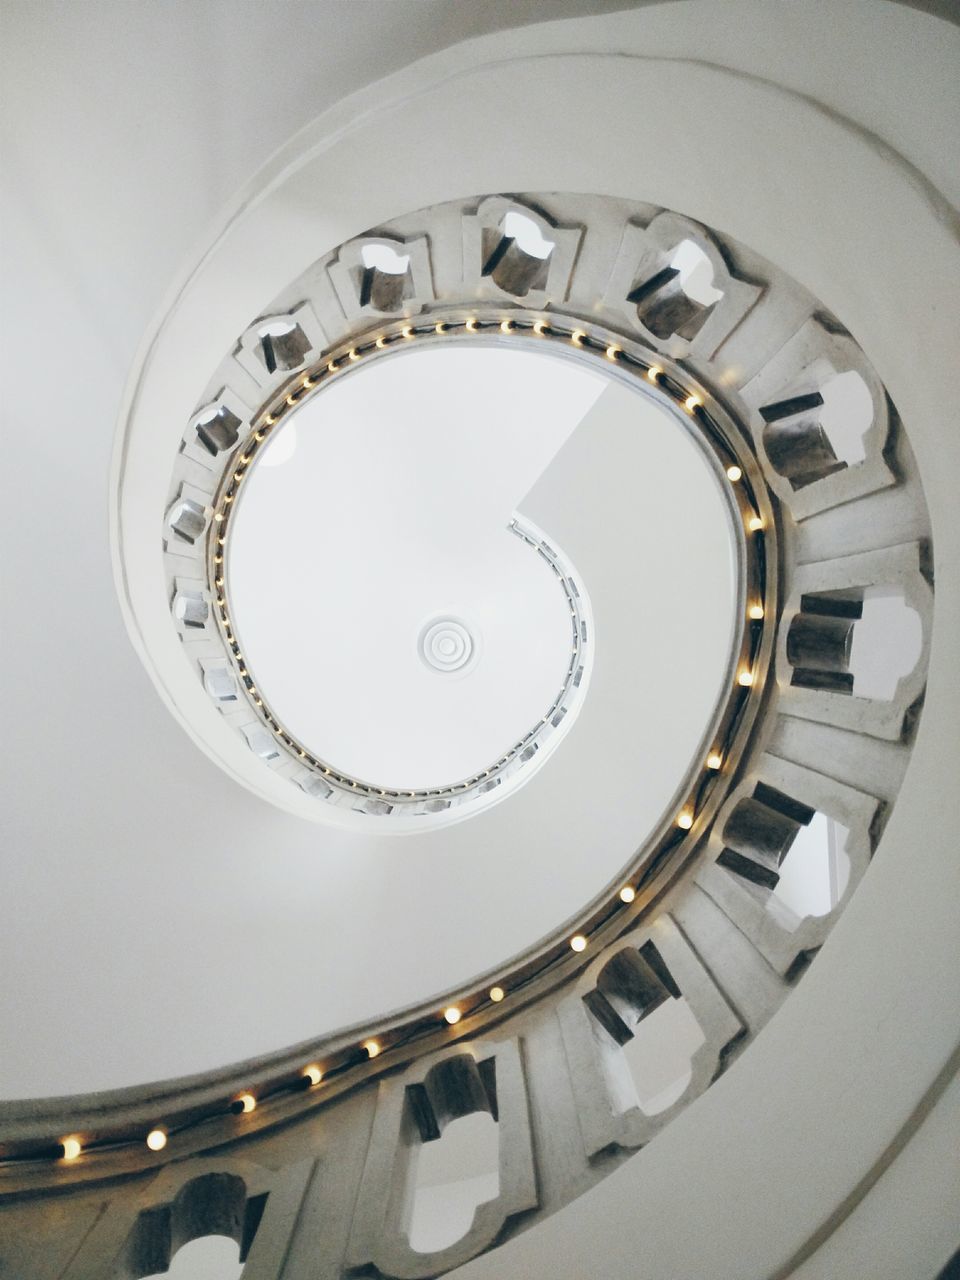 indoors, steps and staircases, staircase, spiral staircase, architecture, built structure, spiral, steps, railing, circle, directly below, low angle view, pattern, stairs, building, high angle view, geometric shape, design, directly above, ceiling